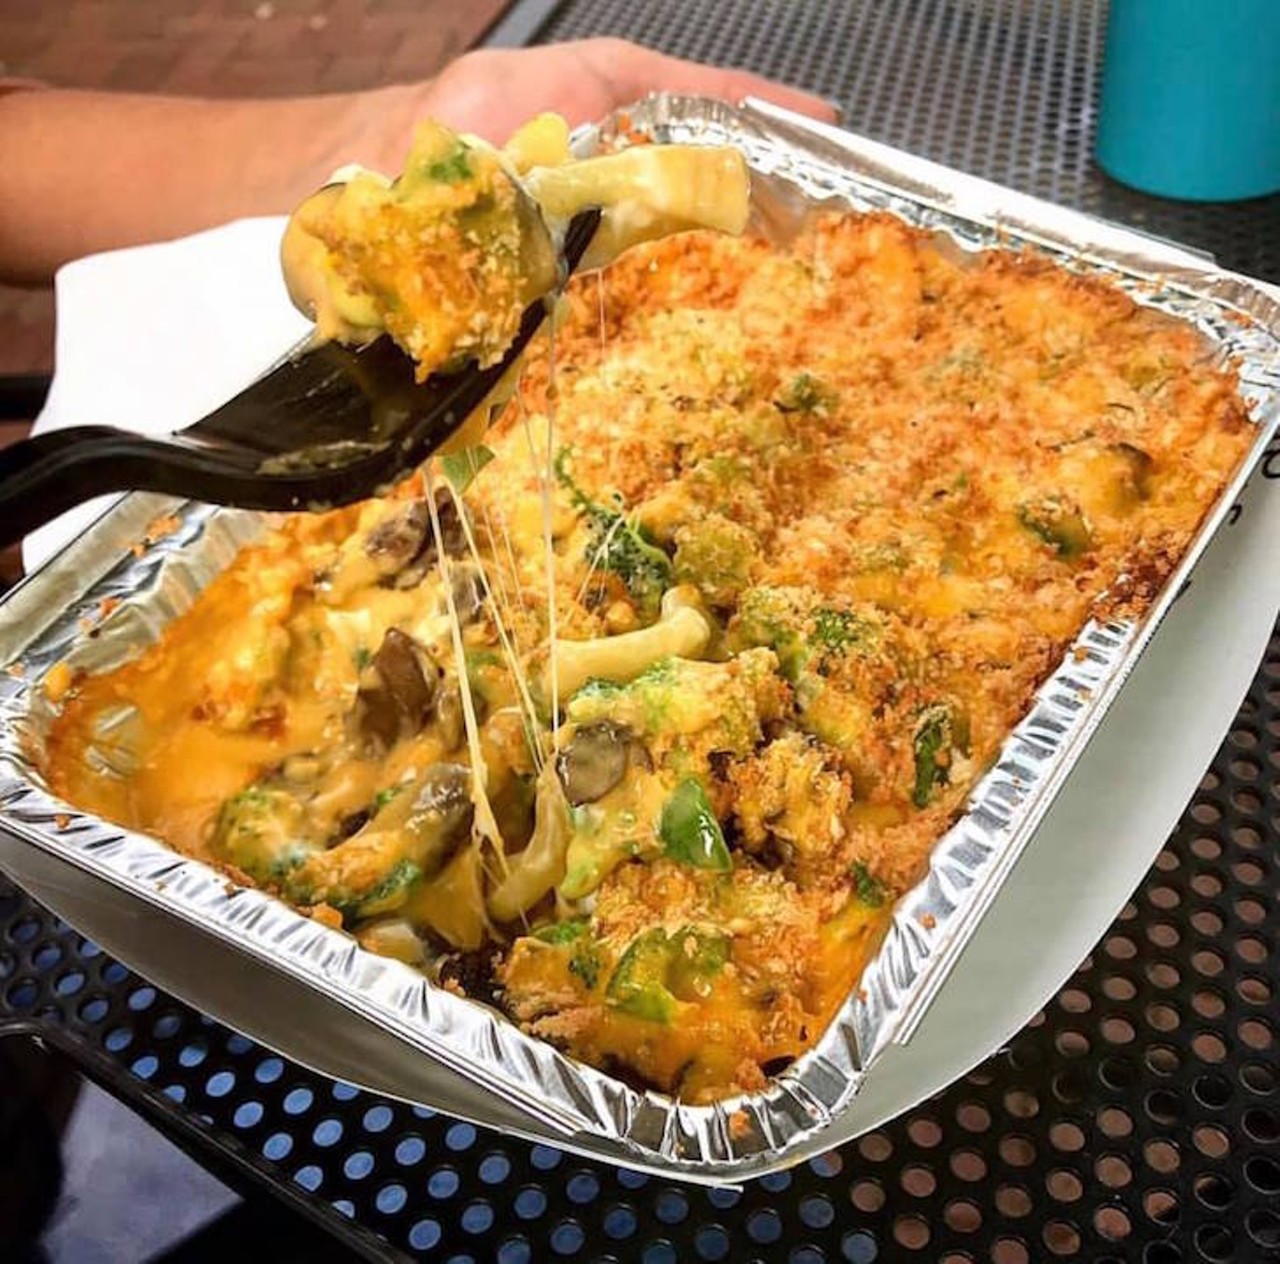 Mac&#146;d Out Winter Garden
426 W. Plant St., Winter Garden
Five-cheese mac & cheese with broccoli, mushrooms and an herb-Romano crust
Photo via Mac&#146;d Out on Facebook